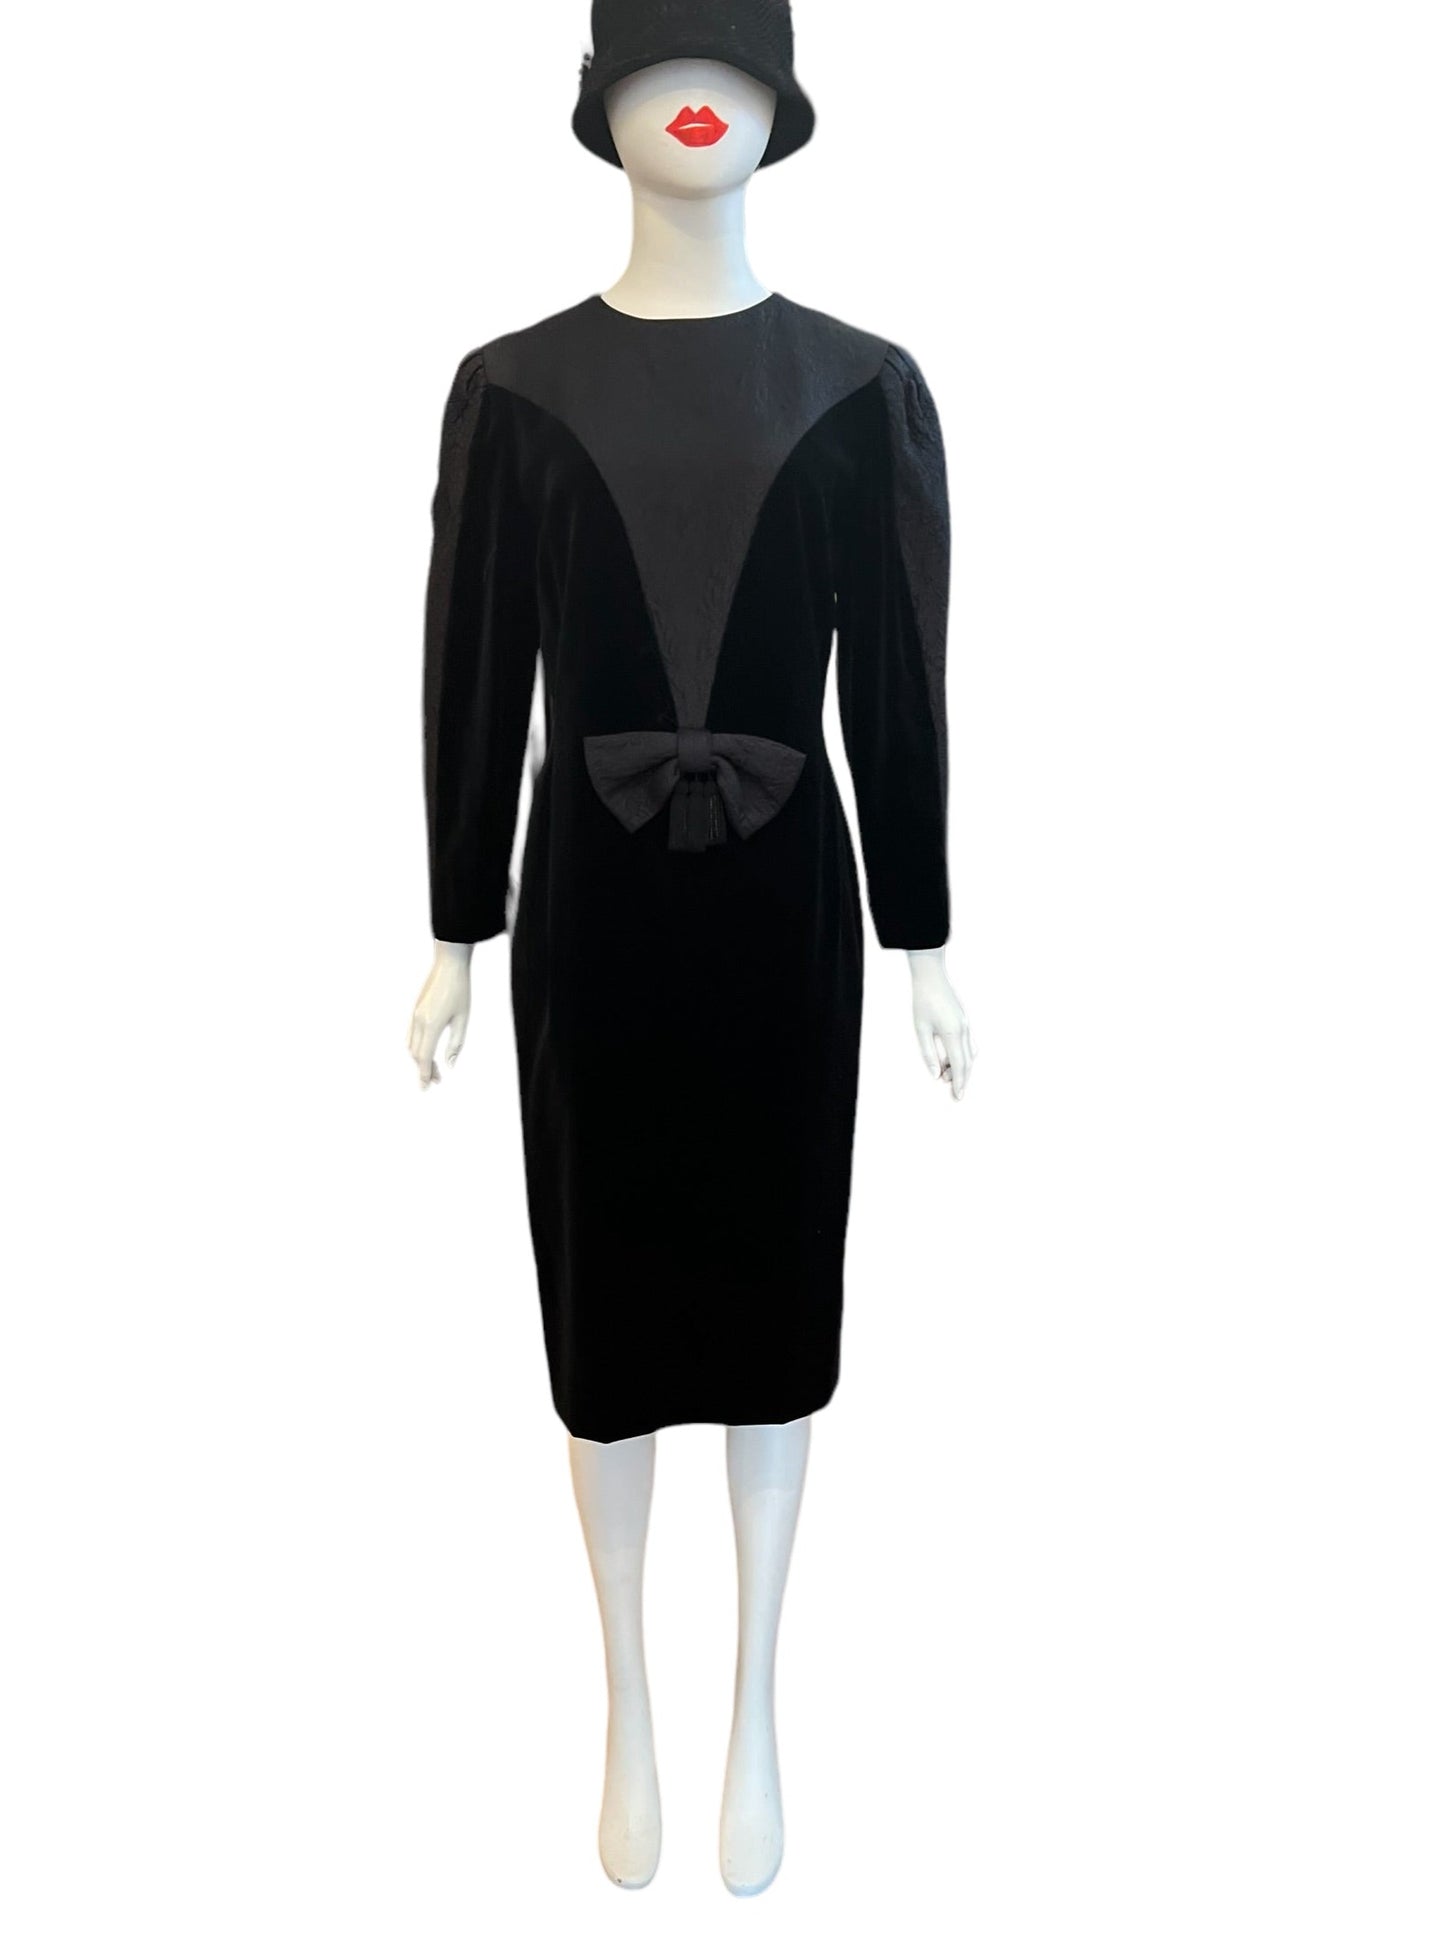 Louis Feraud velvet and contrasting textured material with a statement bow with tassels. 3/4 sleeve and midi length great for the holidays!